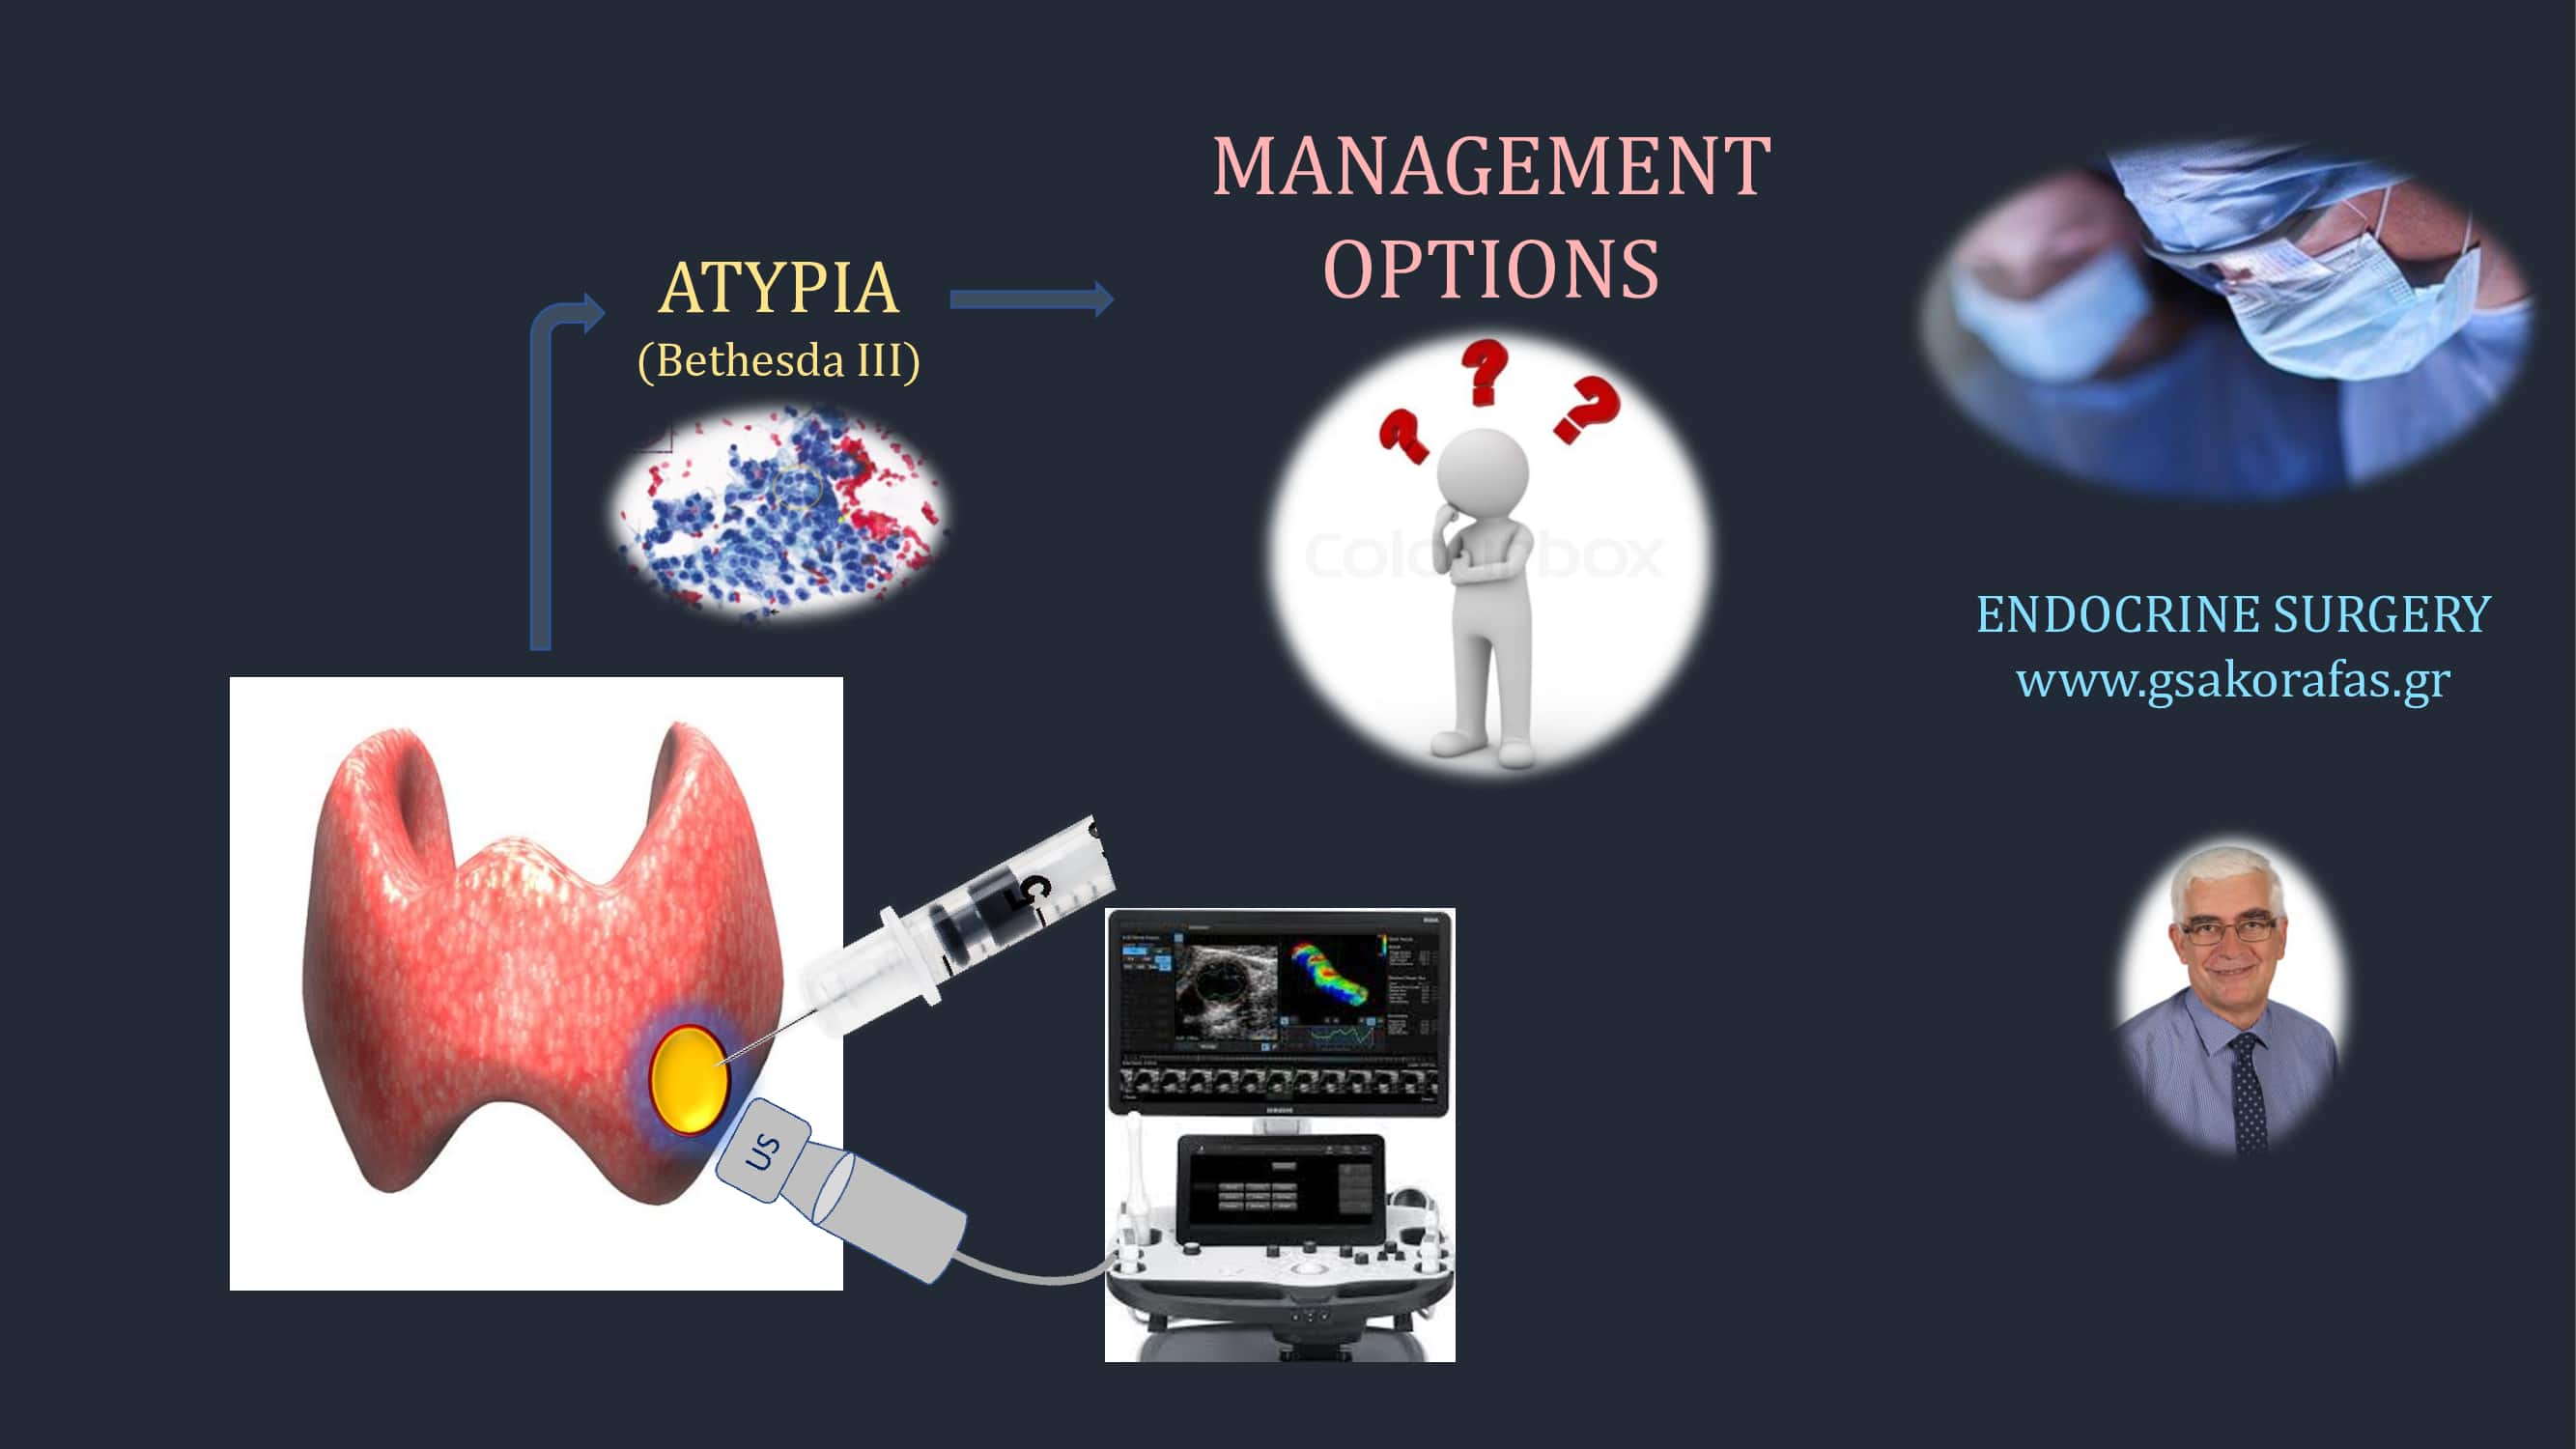 Thyroid nodules and atypia (Bethesda III cytology) – clinical significance and management options